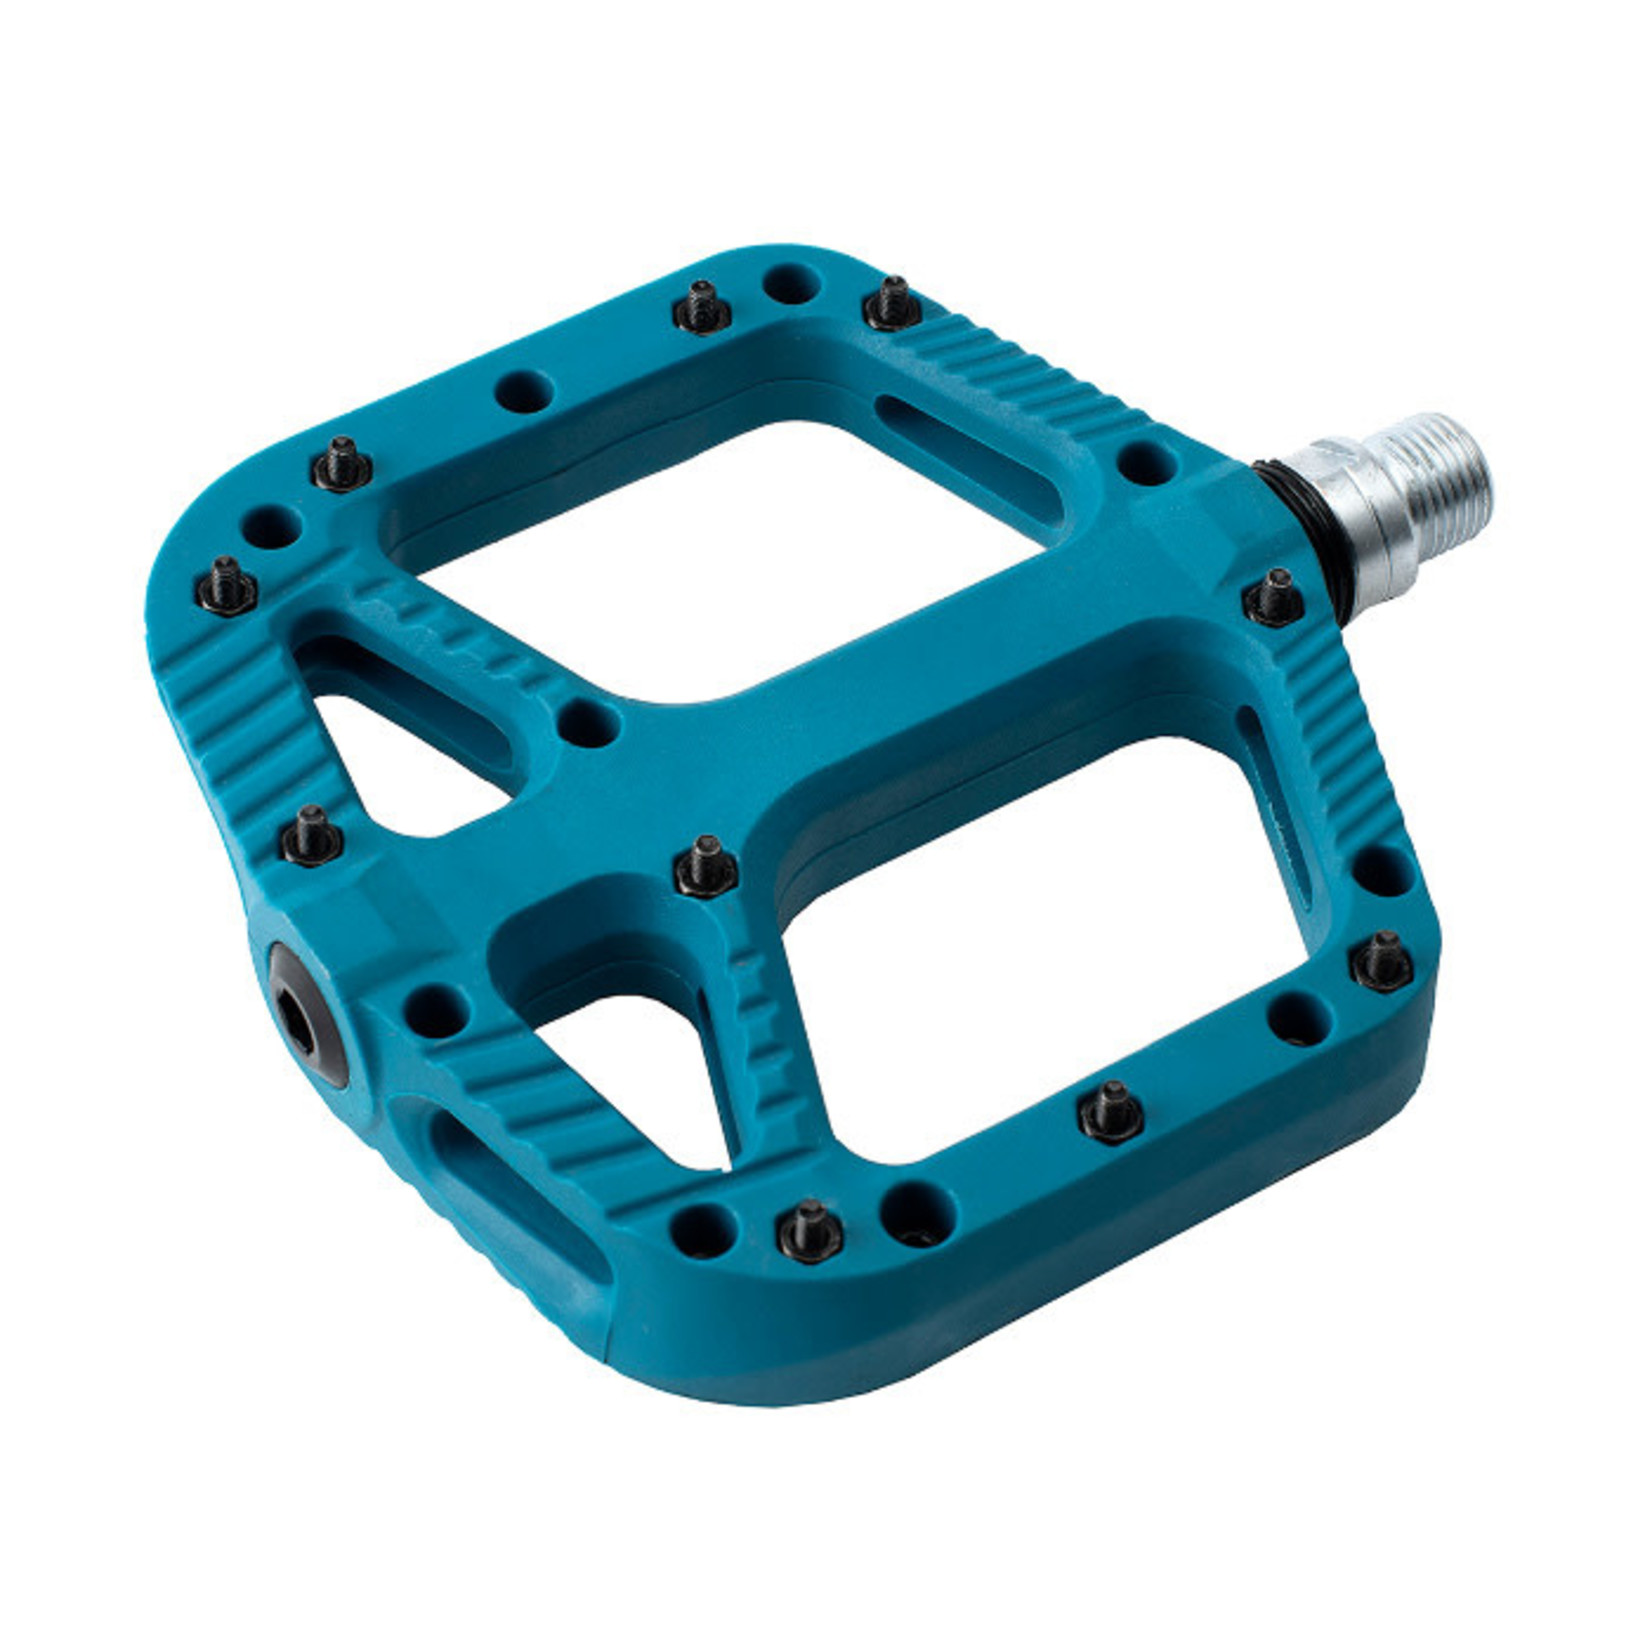 RYFE Nylon Comp Pedal - SASQUATCH - Sealed Bearing, Removable Pins, TEAL